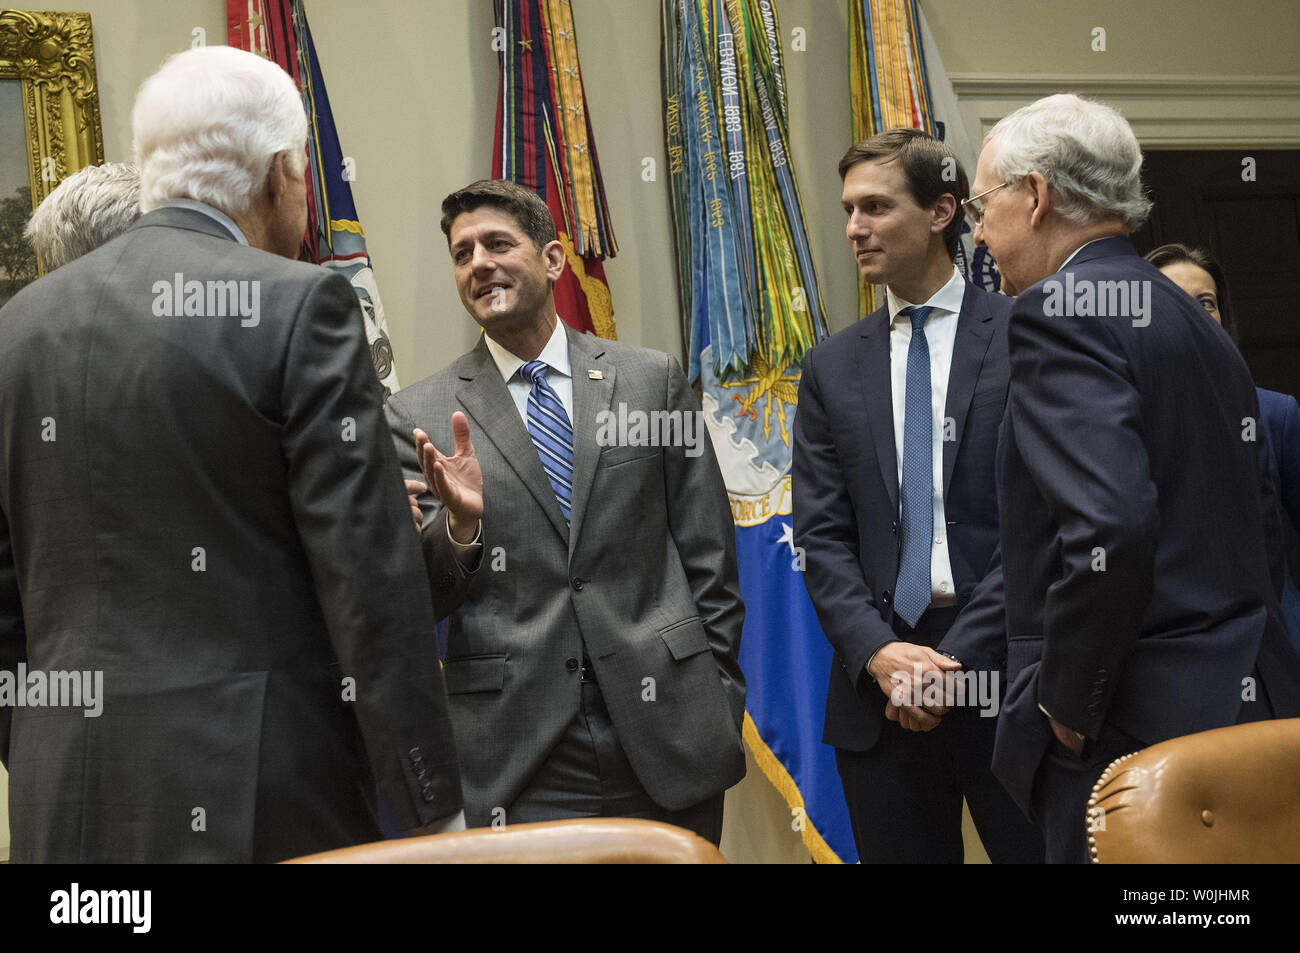 Congressional leaders, from left to right, Sen. John Cornyn, R-TX, Speaker of the House Paul Ryan, R-Wis., Jared Kushner, President Trump's son-in-law and senior adviser, and Rep. Steve Scalise, R-LA, talk prior to a meeting with President Donald Trump in the Roosevelt Room at the White House on June 6, 2017. Photo by Kevin Dietsch/UPI Stock Photo